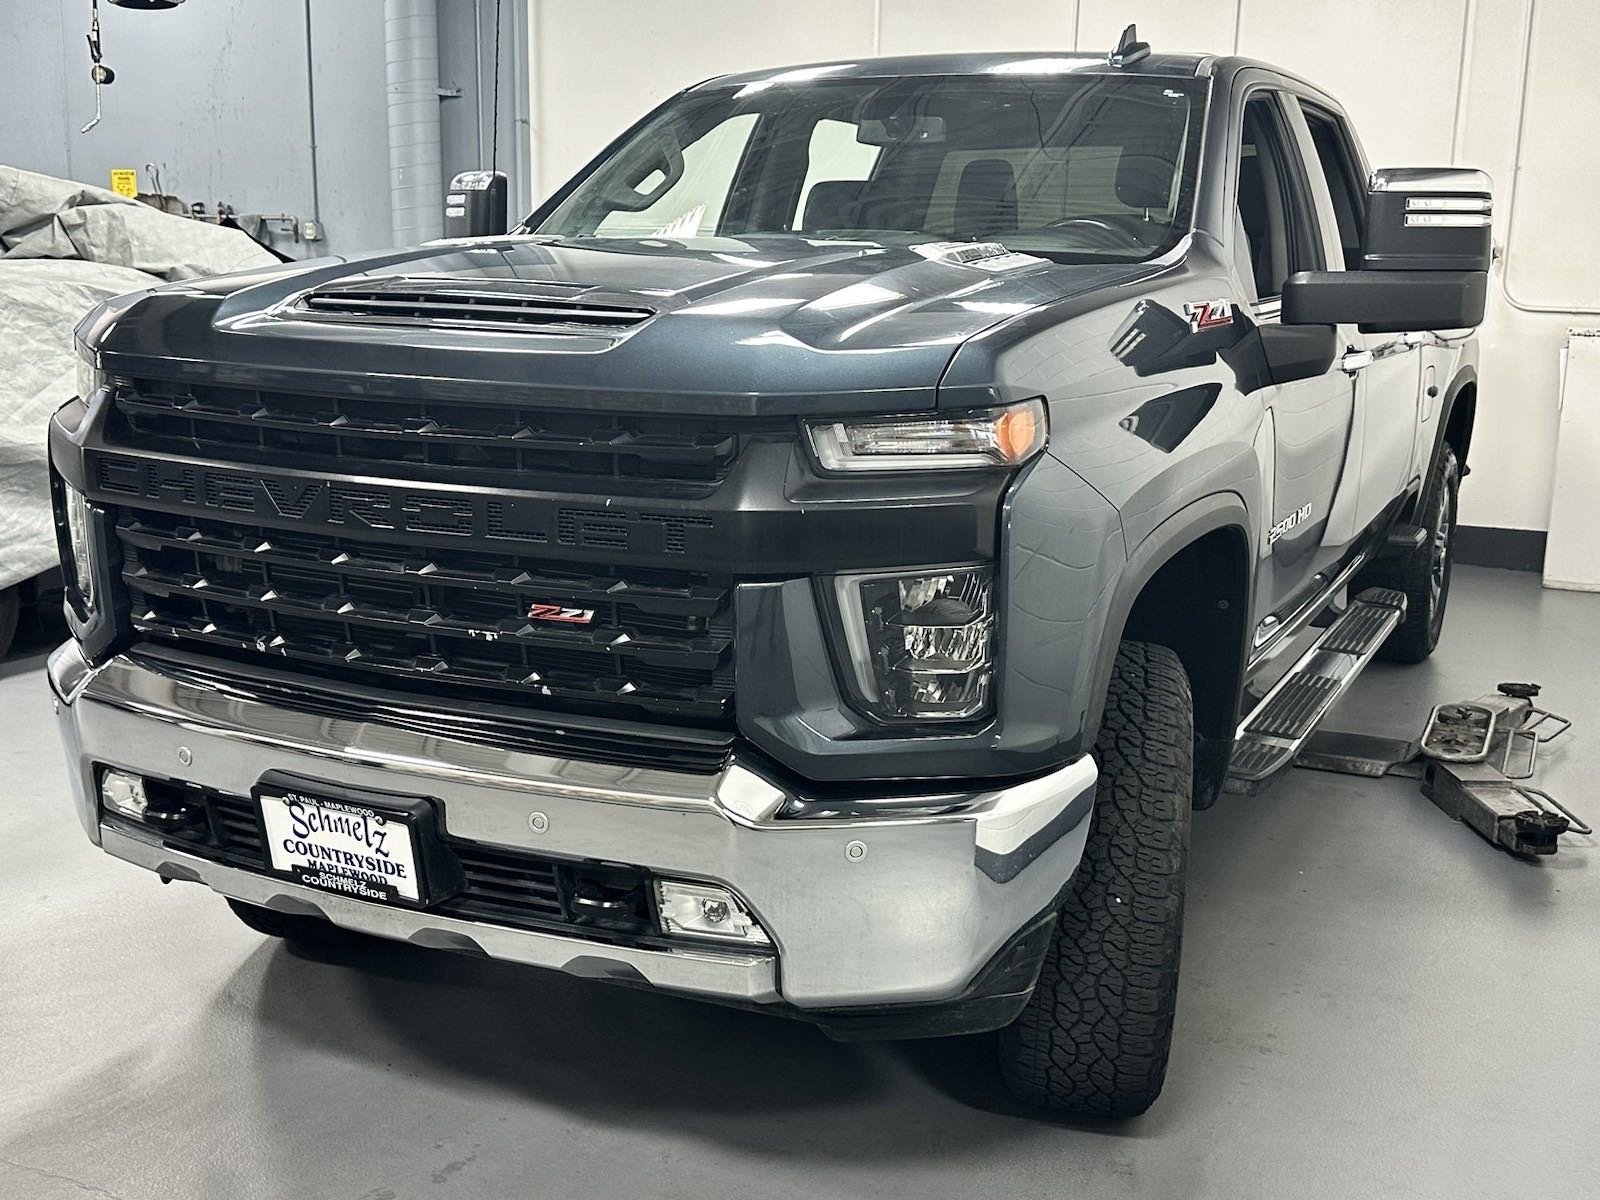 Used 2020 Chevrolet Silverado 2500HD LTZ with VIN 1GC4YPEY8LF172490 for sale in Maplewood, Minnesota